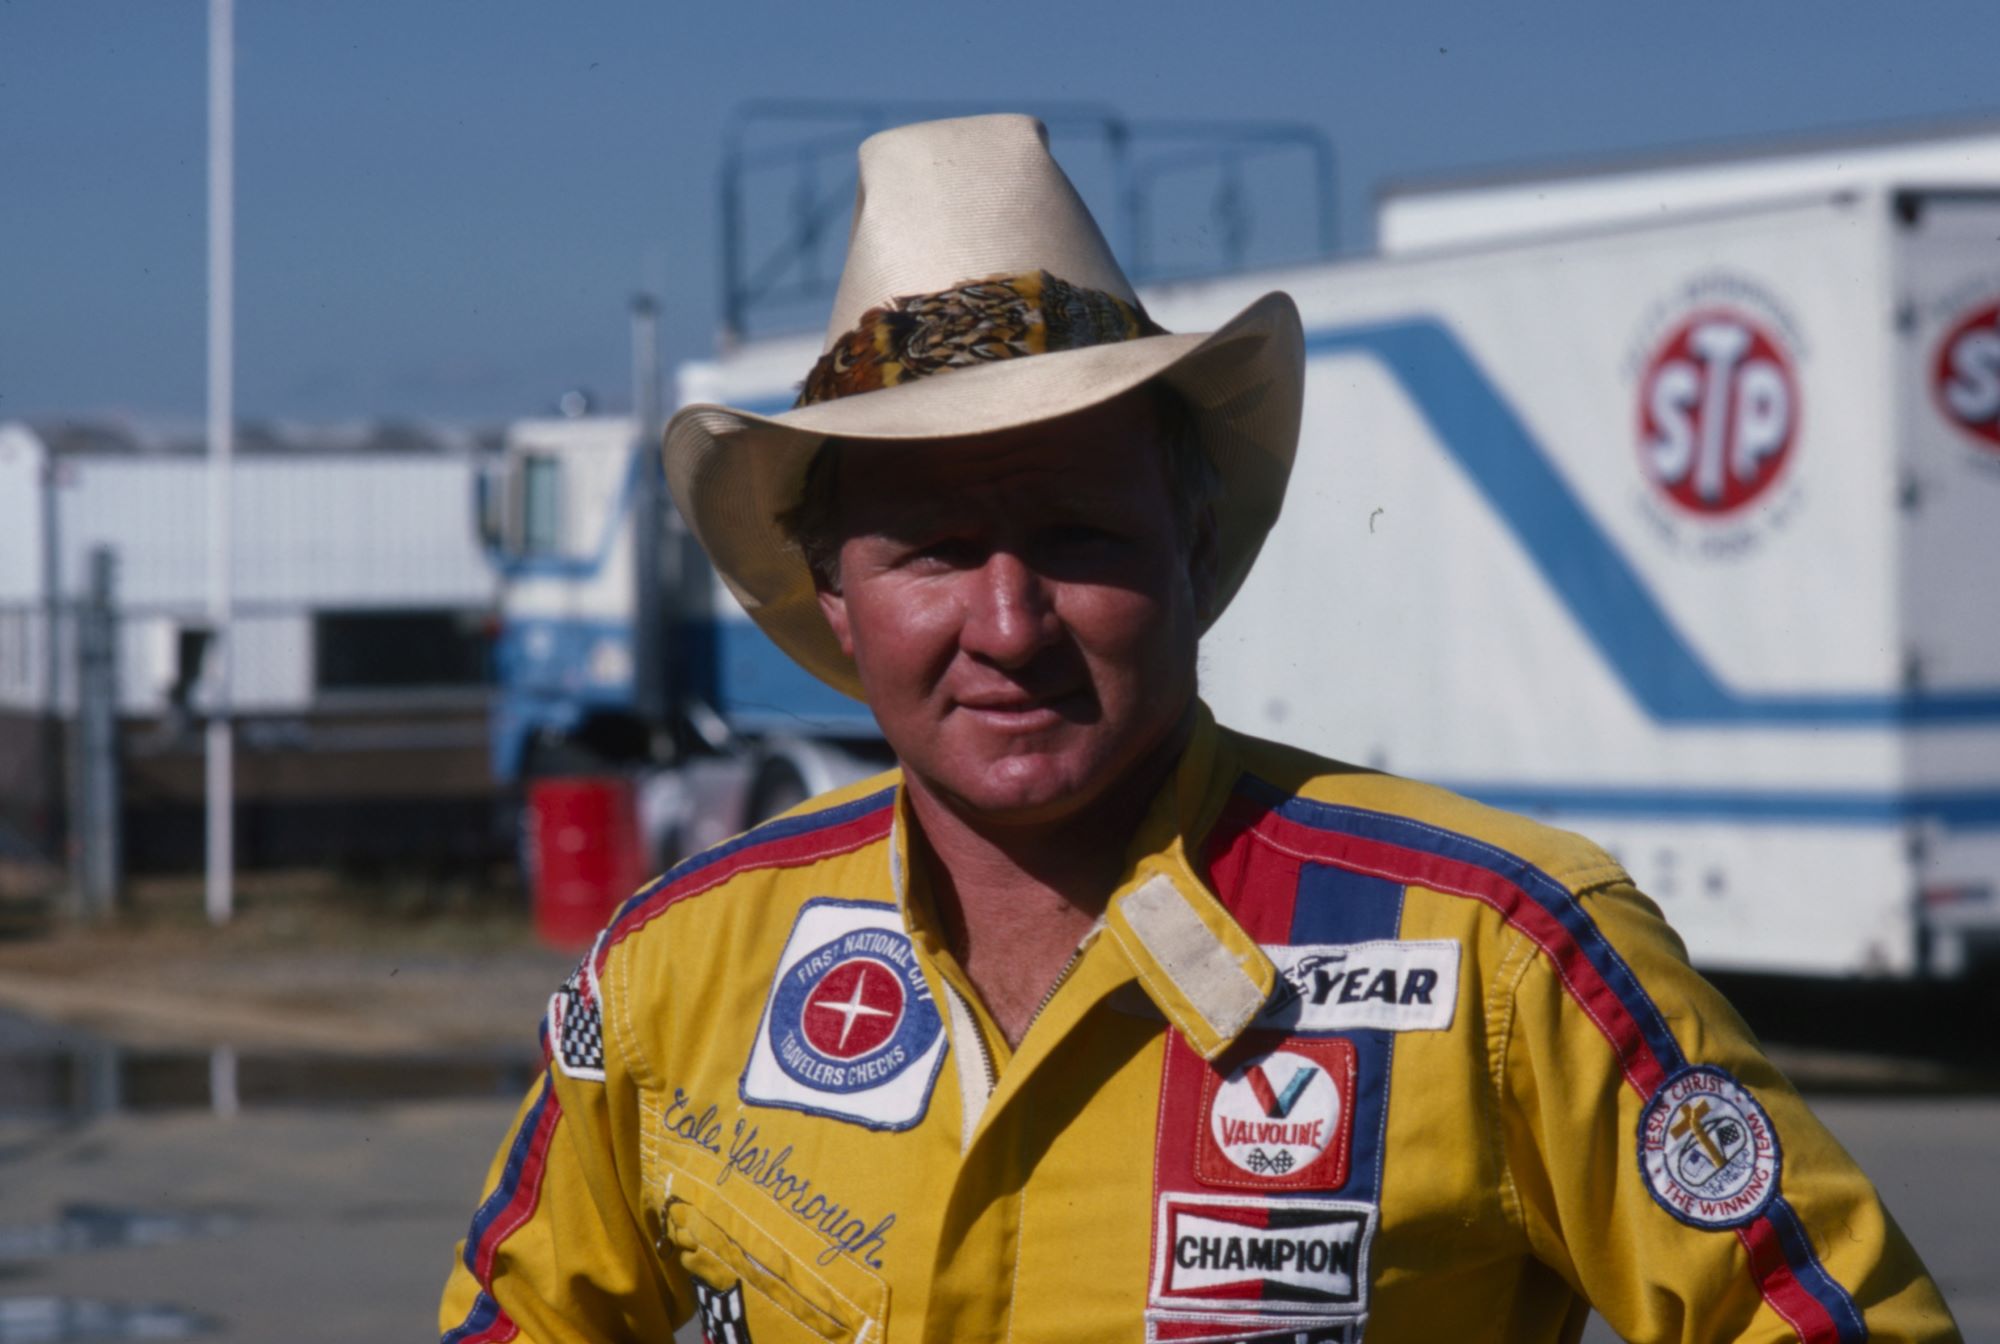 Cale Yarborough wearing a yellow shirt with carious branded patches.